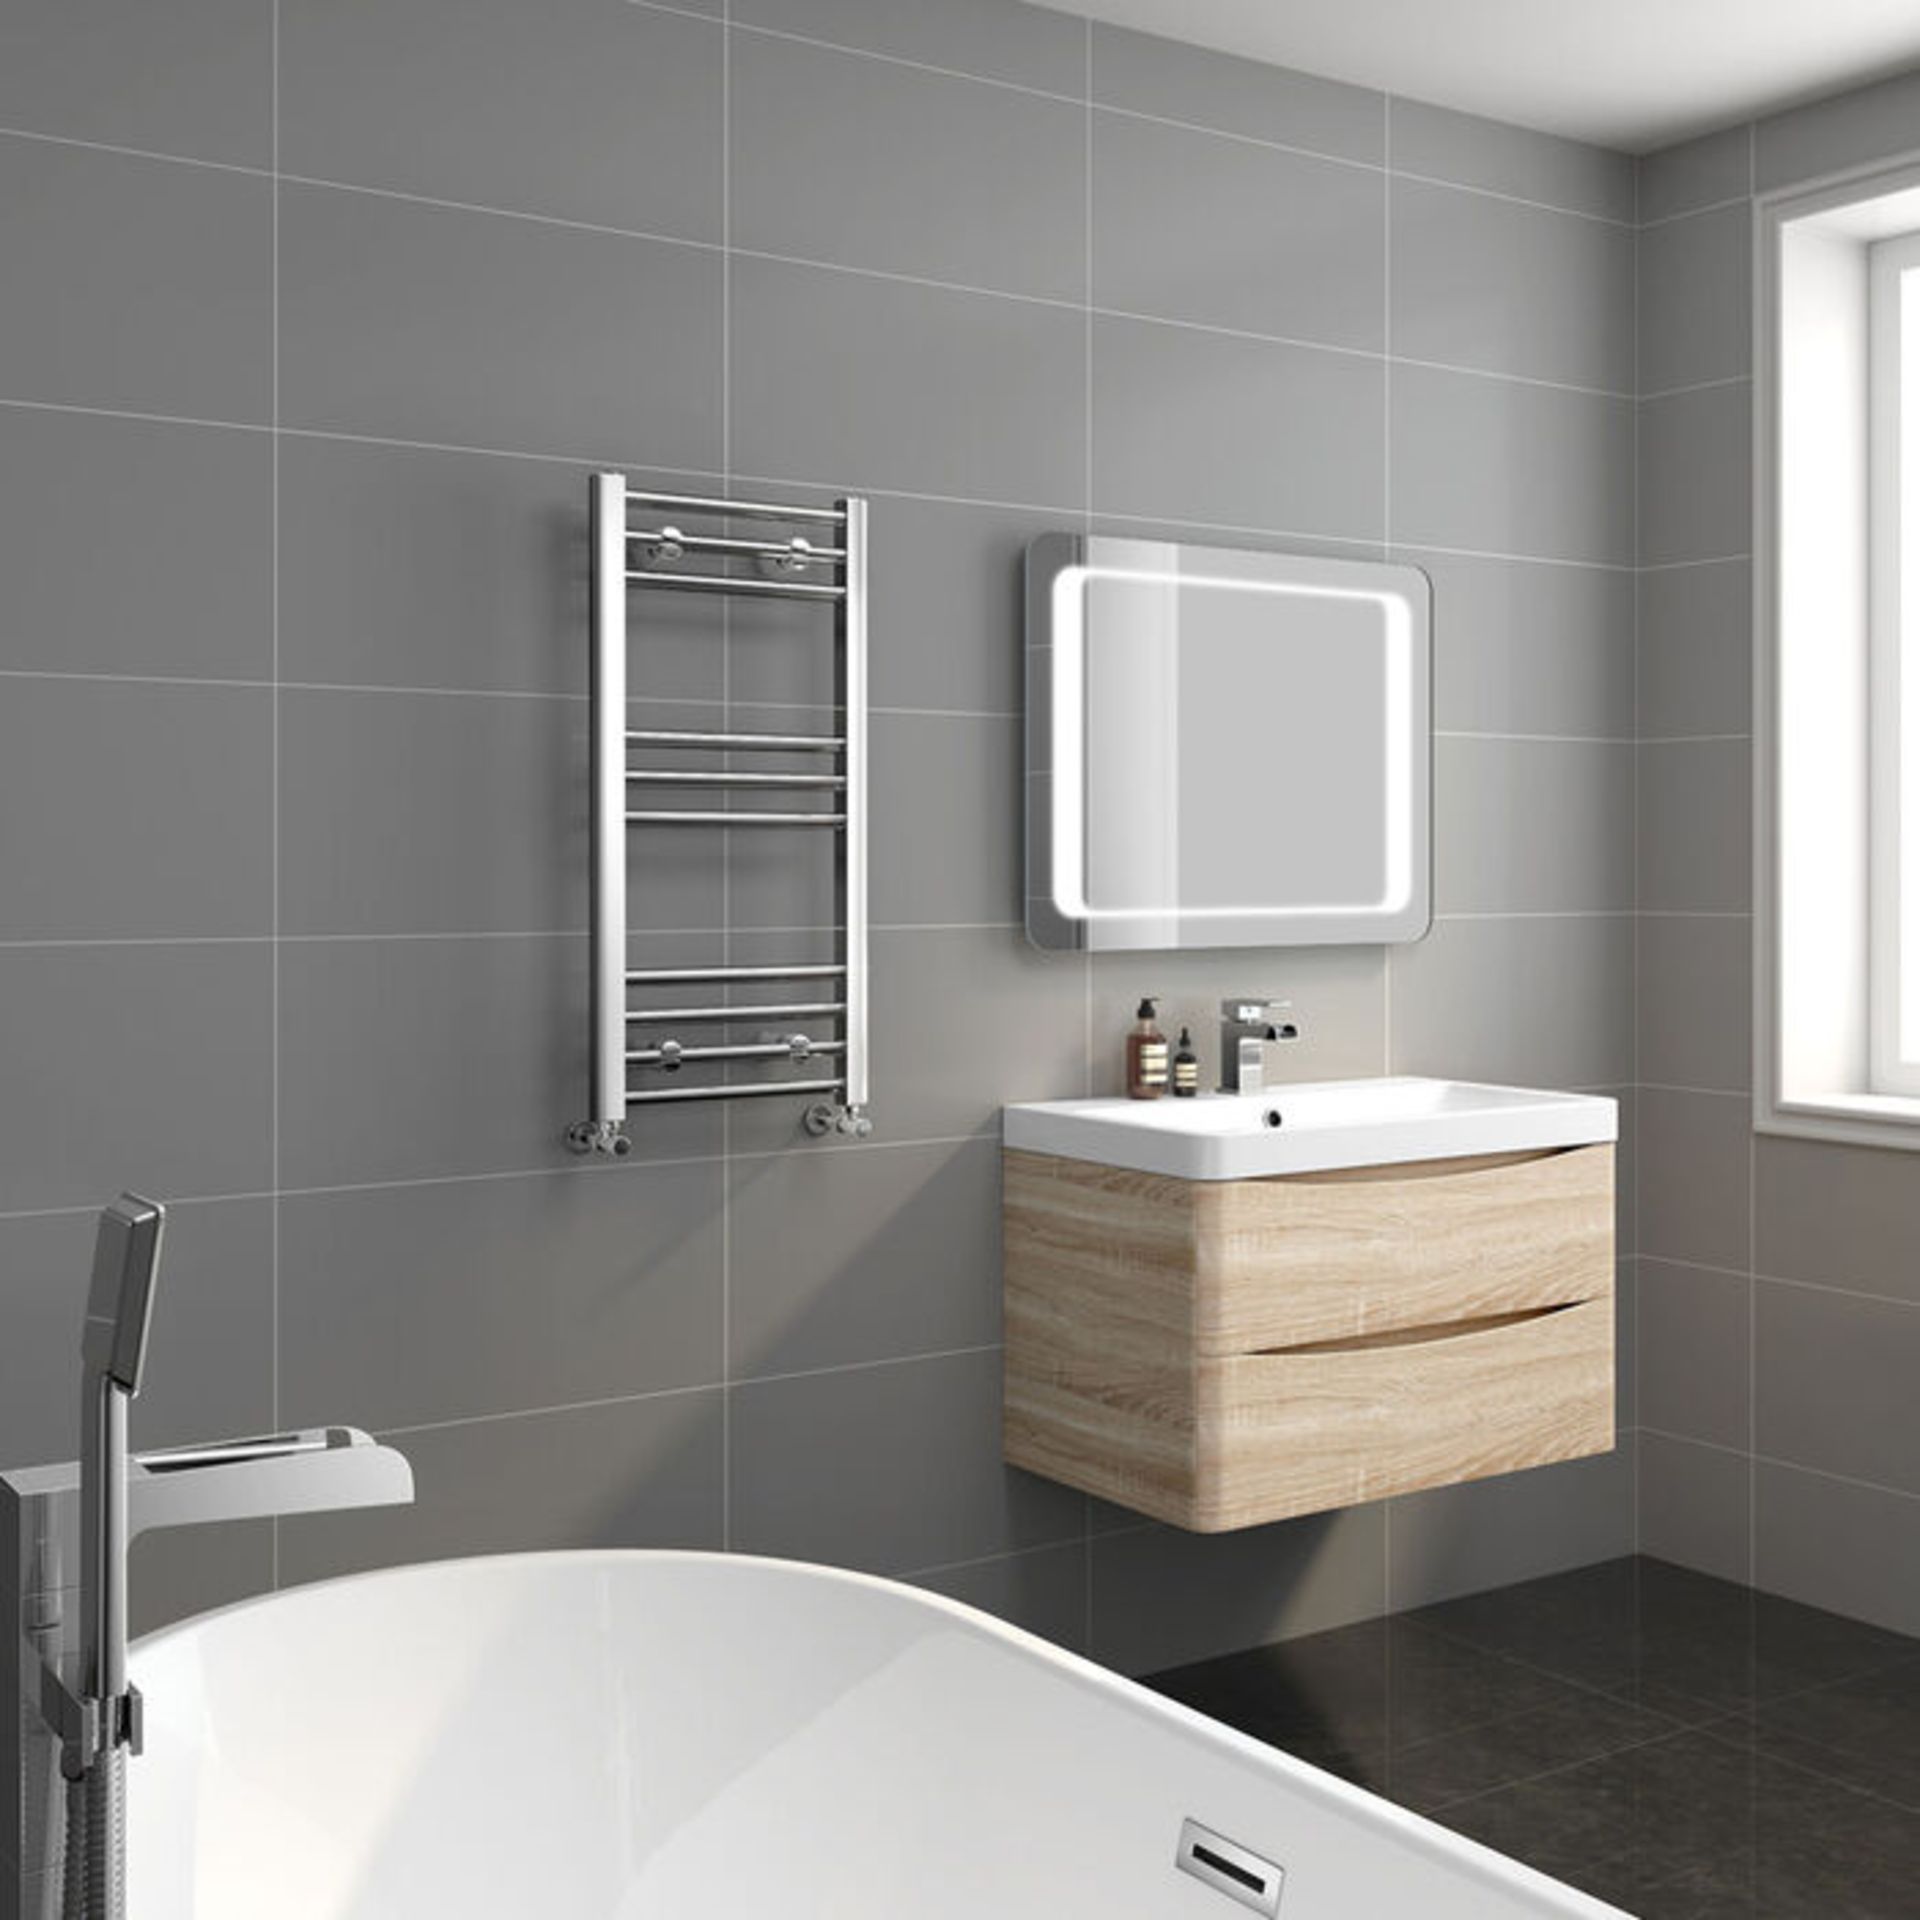 (H49) 800x400mm - 20mm Tubes - Chrome Heated Straight Rail Ladder Towel Radiator We also use t... - Image 2 of 3